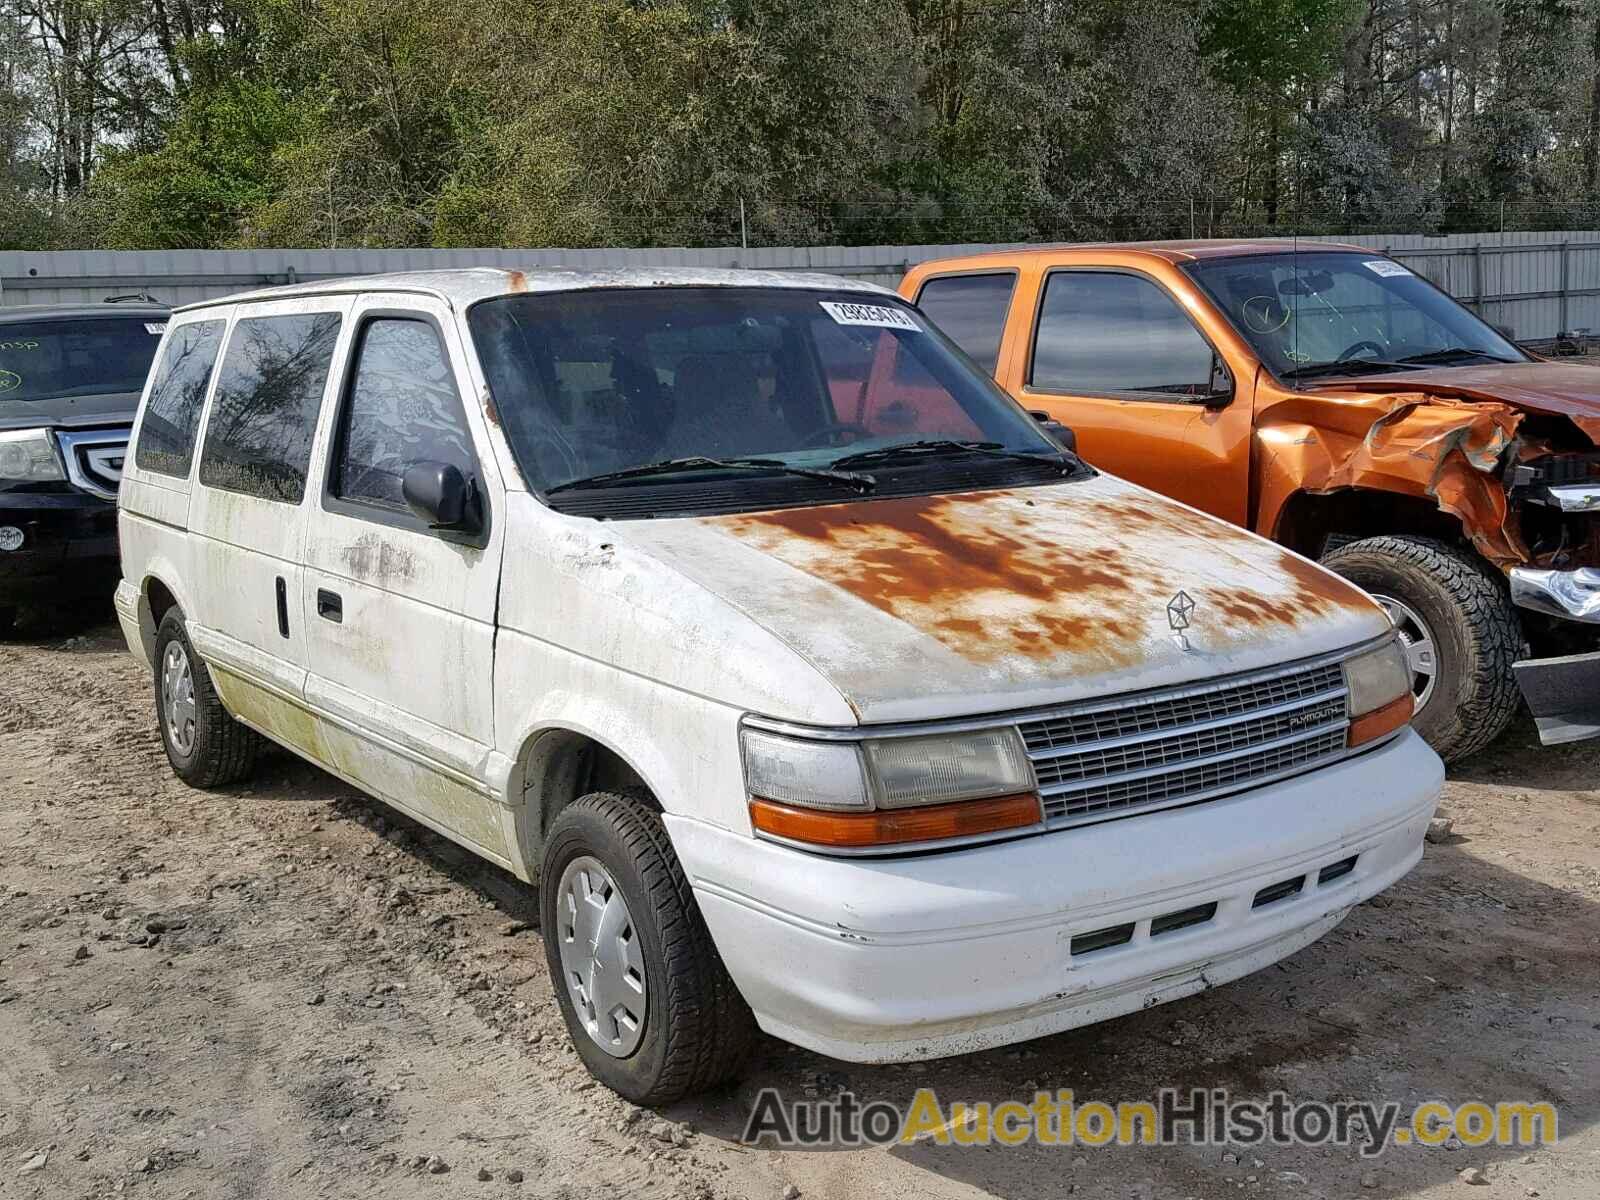 1995 PLYMOUTH VOYAGER, 2P4GH2537SR347884